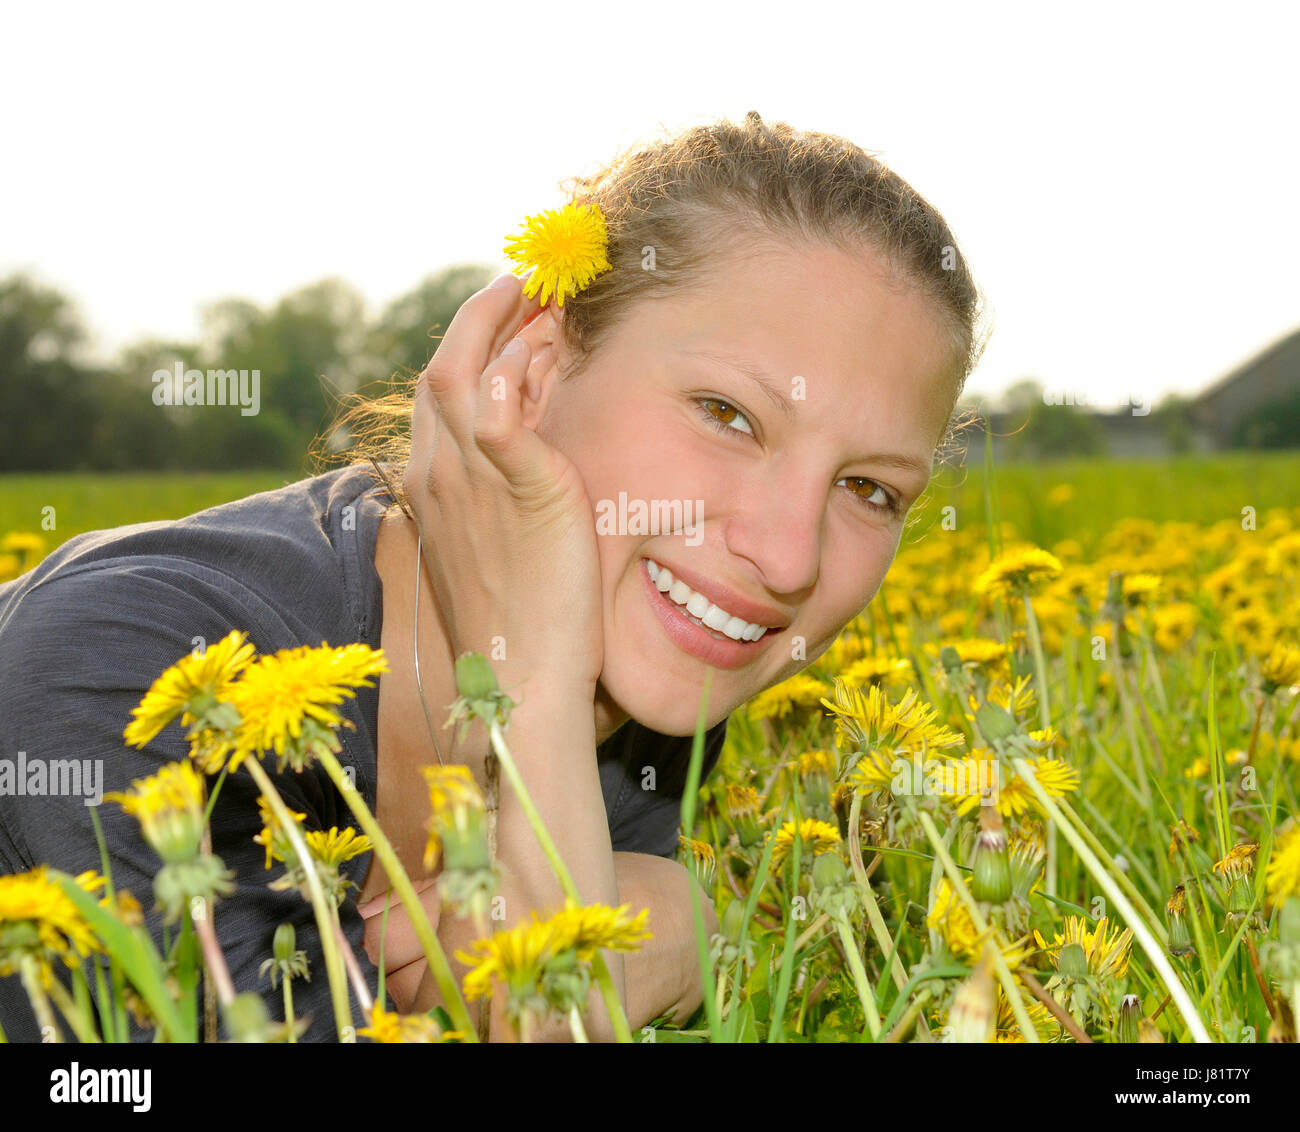 young woman on a flower meadow Stock Photo